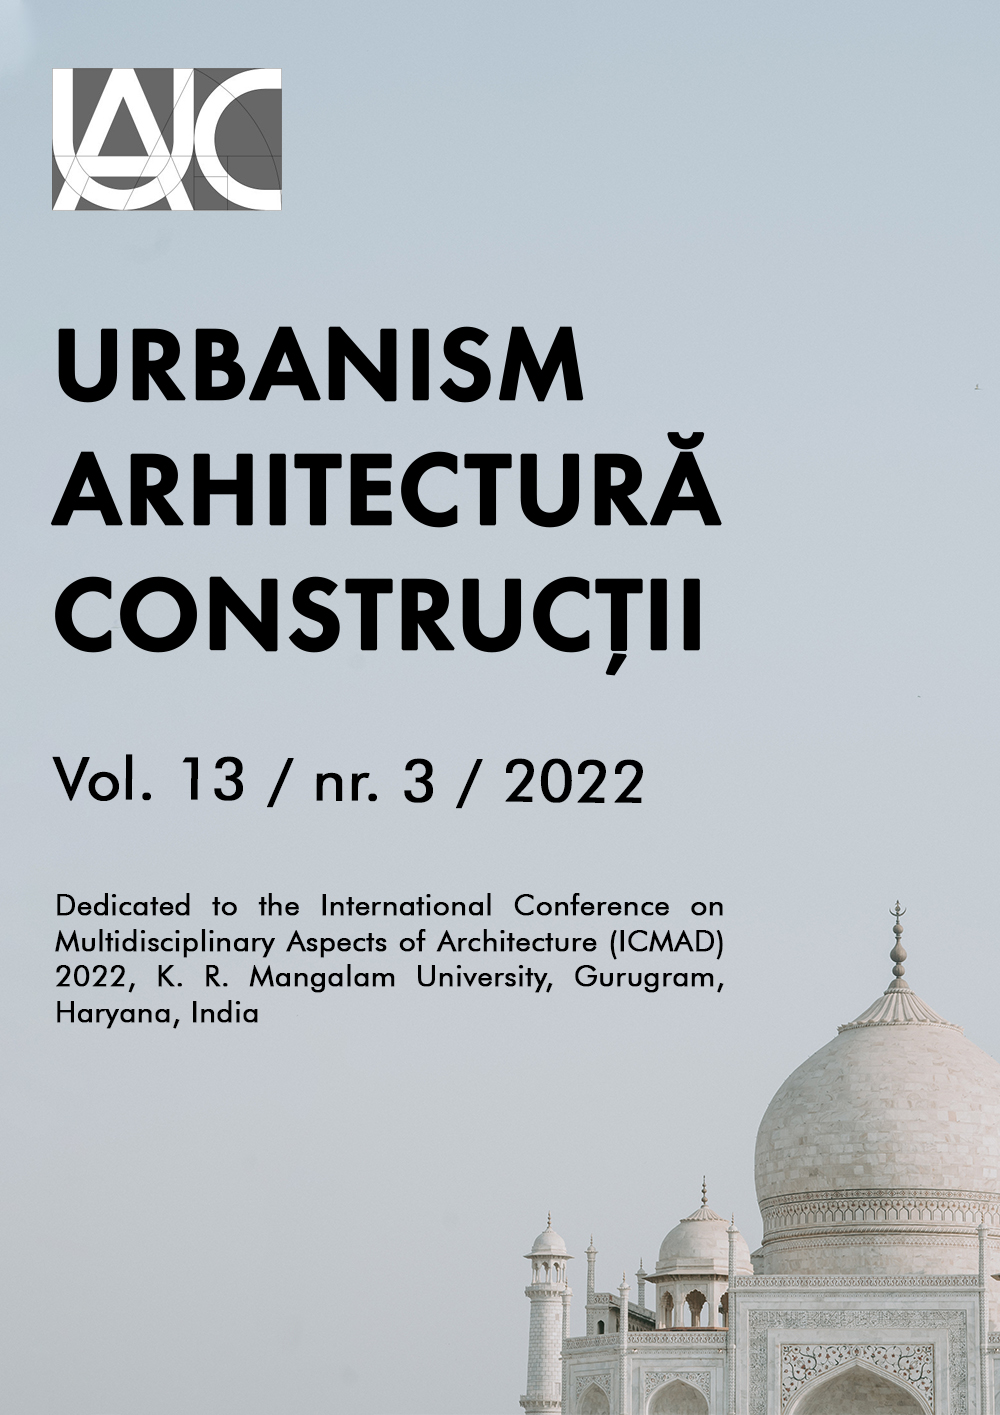 Urban transit impacting greenery especially on streetscape: A review